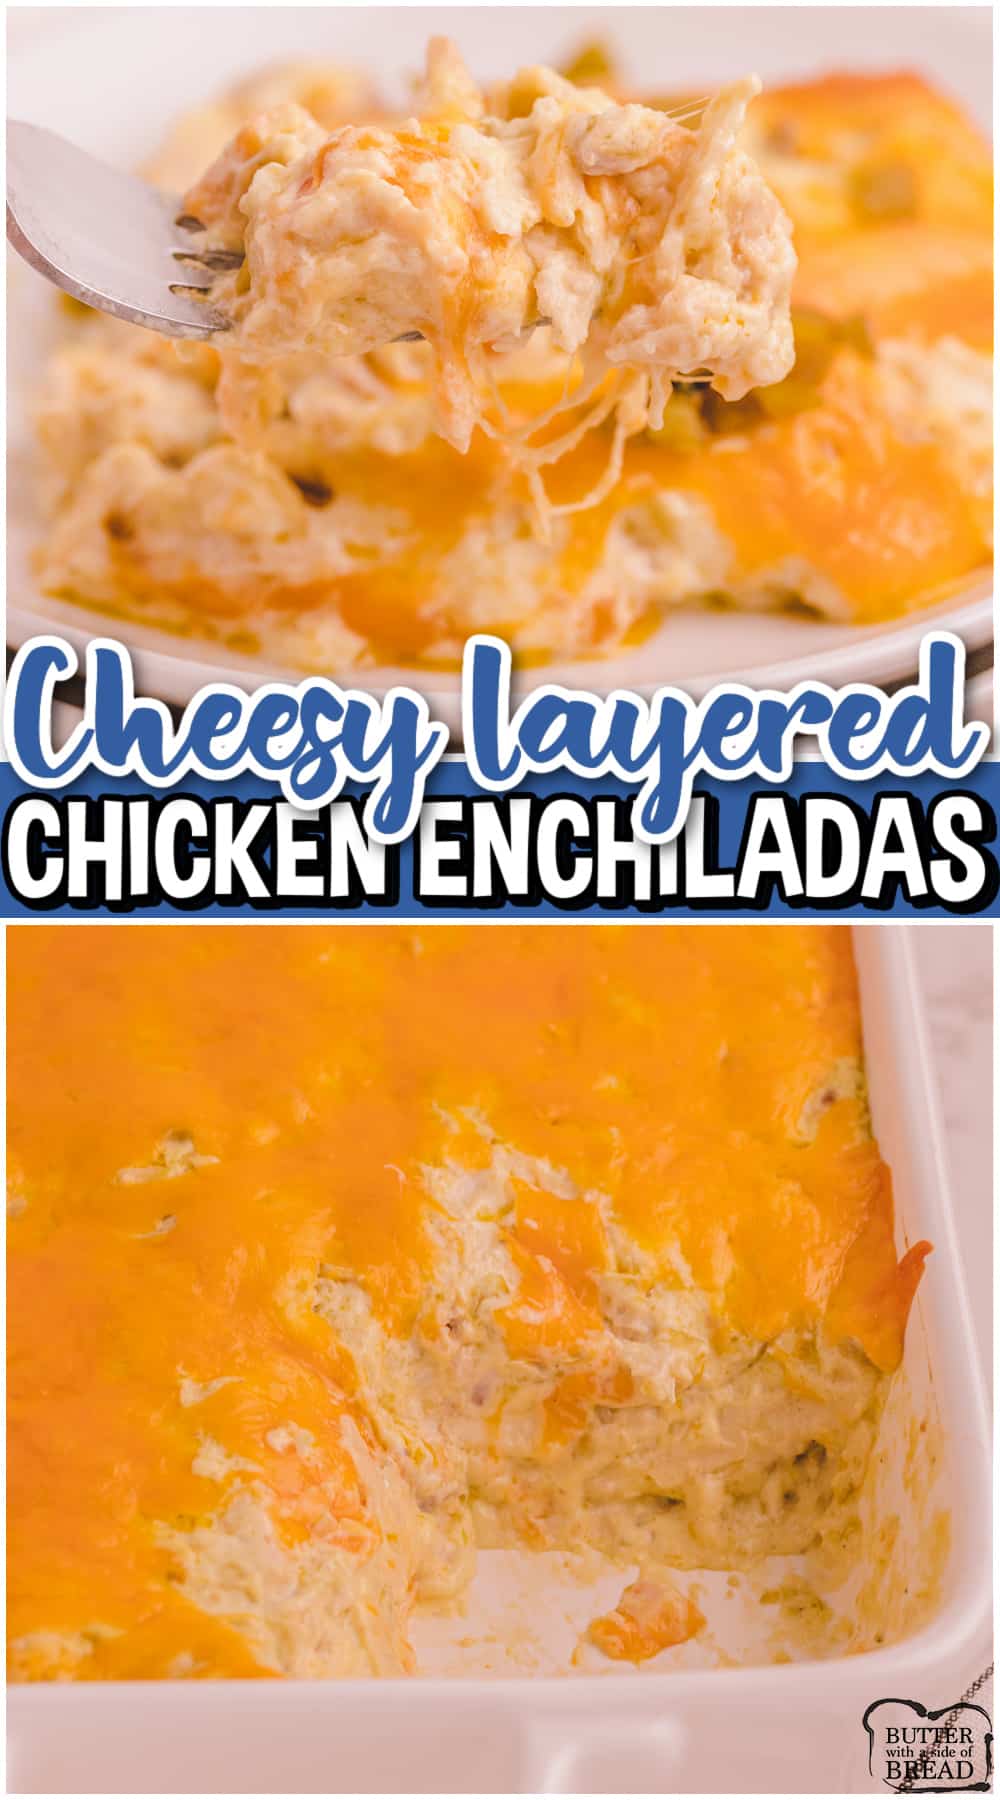 Layered Chicken Enchilada Casserole made easy by layering tortillas with a creamy, flavorful chicken mixture & cheese! Simple chicken enchiladas dinner that's perfect for busy weeknights!